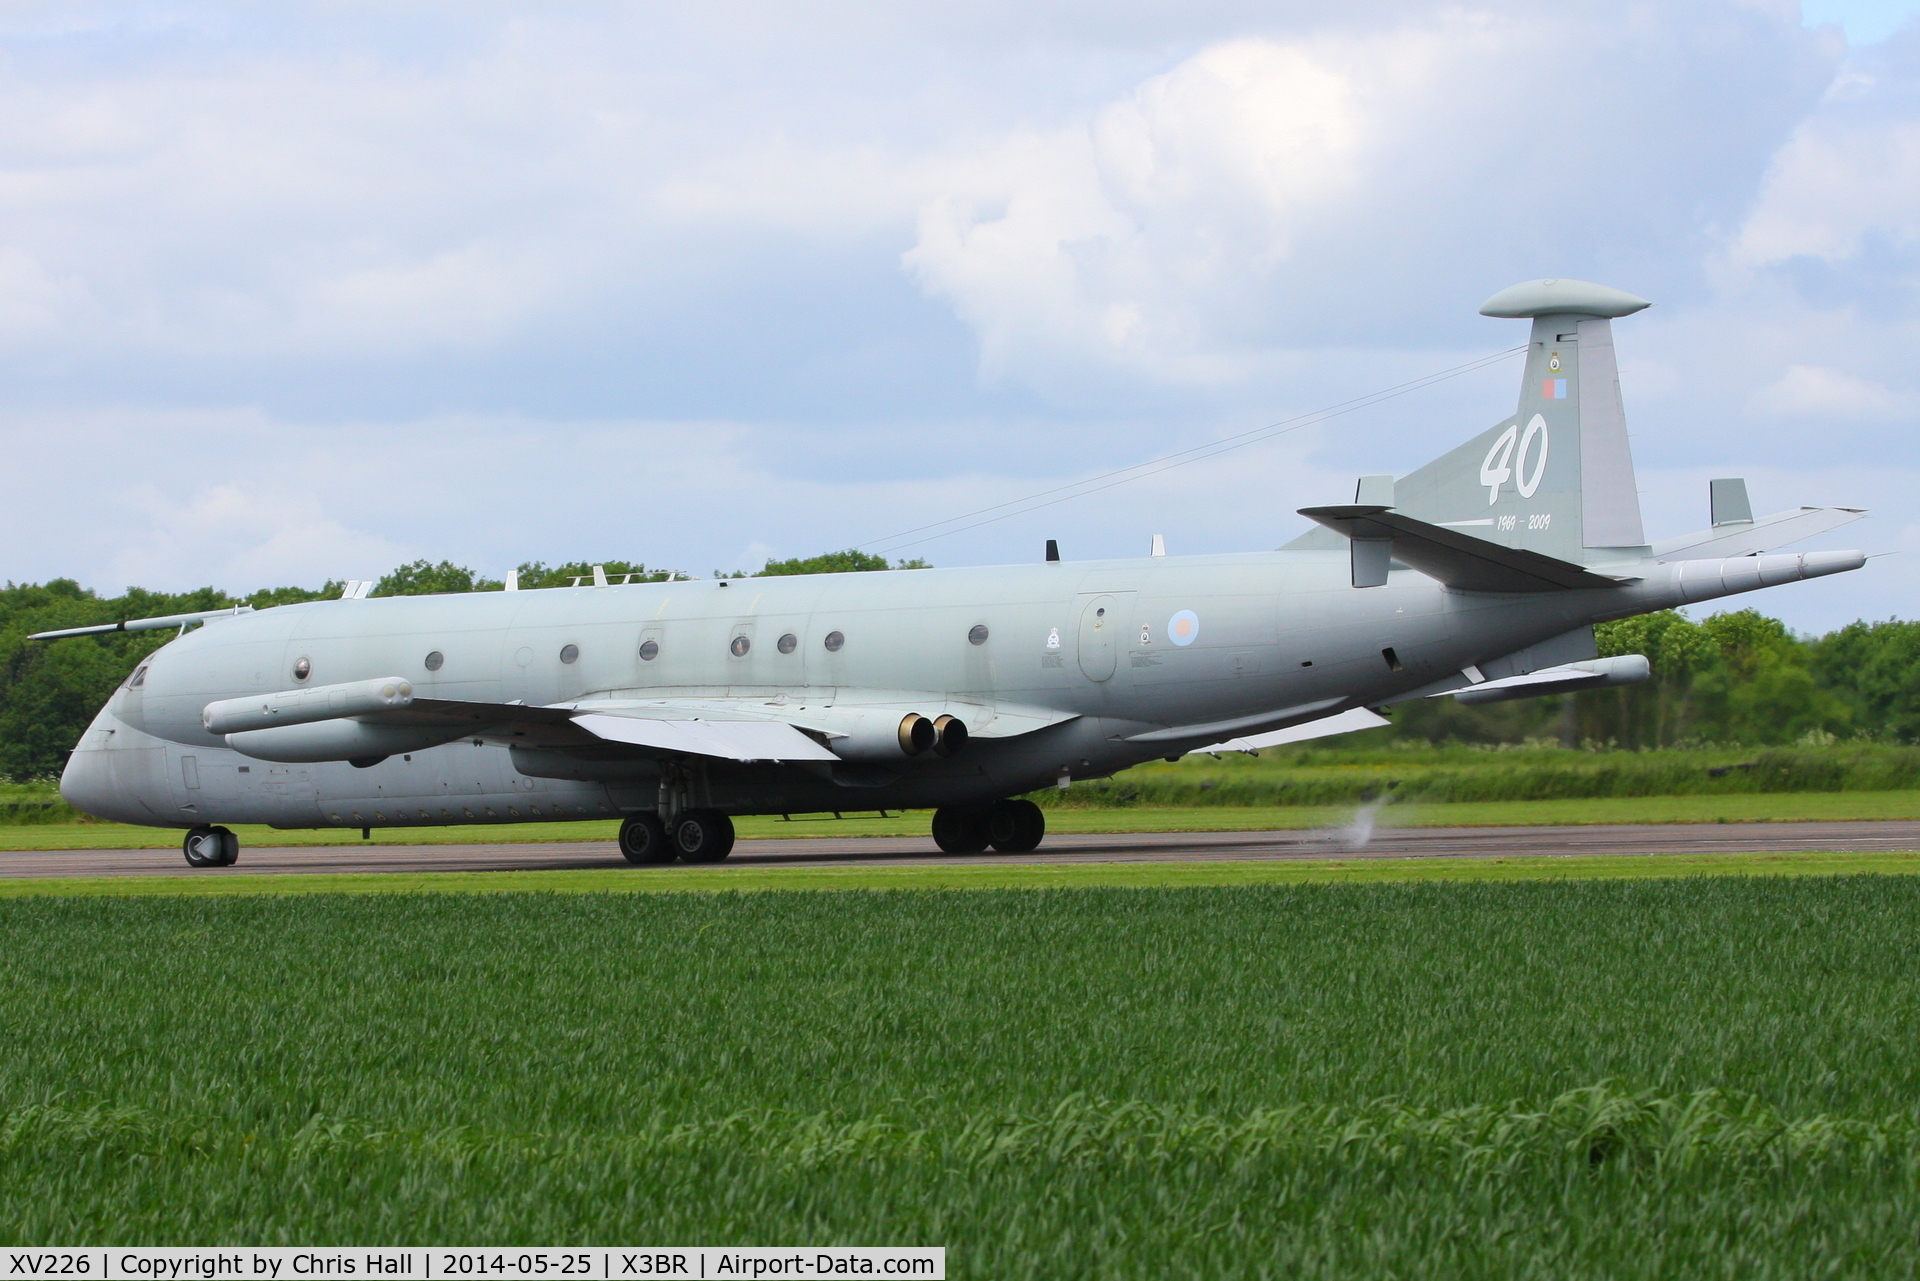 XV226, 1968 Hawker Siddeley Nimrod MR.2 C/N 8001, performing its taxy run at the Cold War Jets Open Day 2014